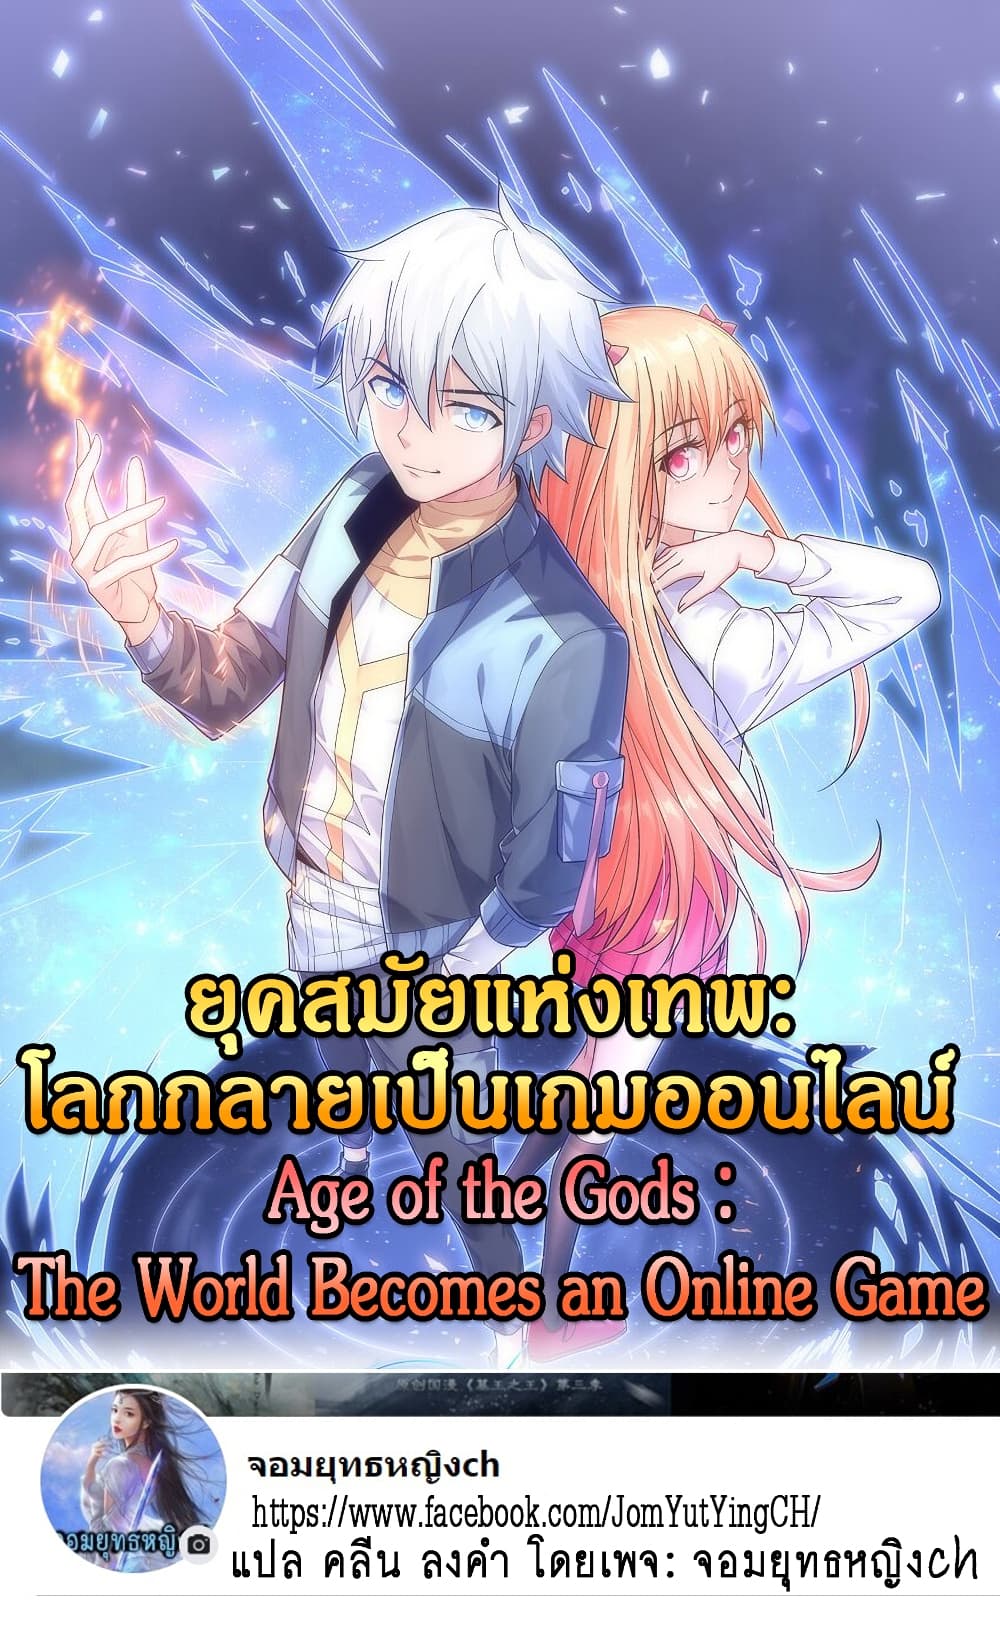 Age of the Gods: The World Becomes an Online Game 5-5